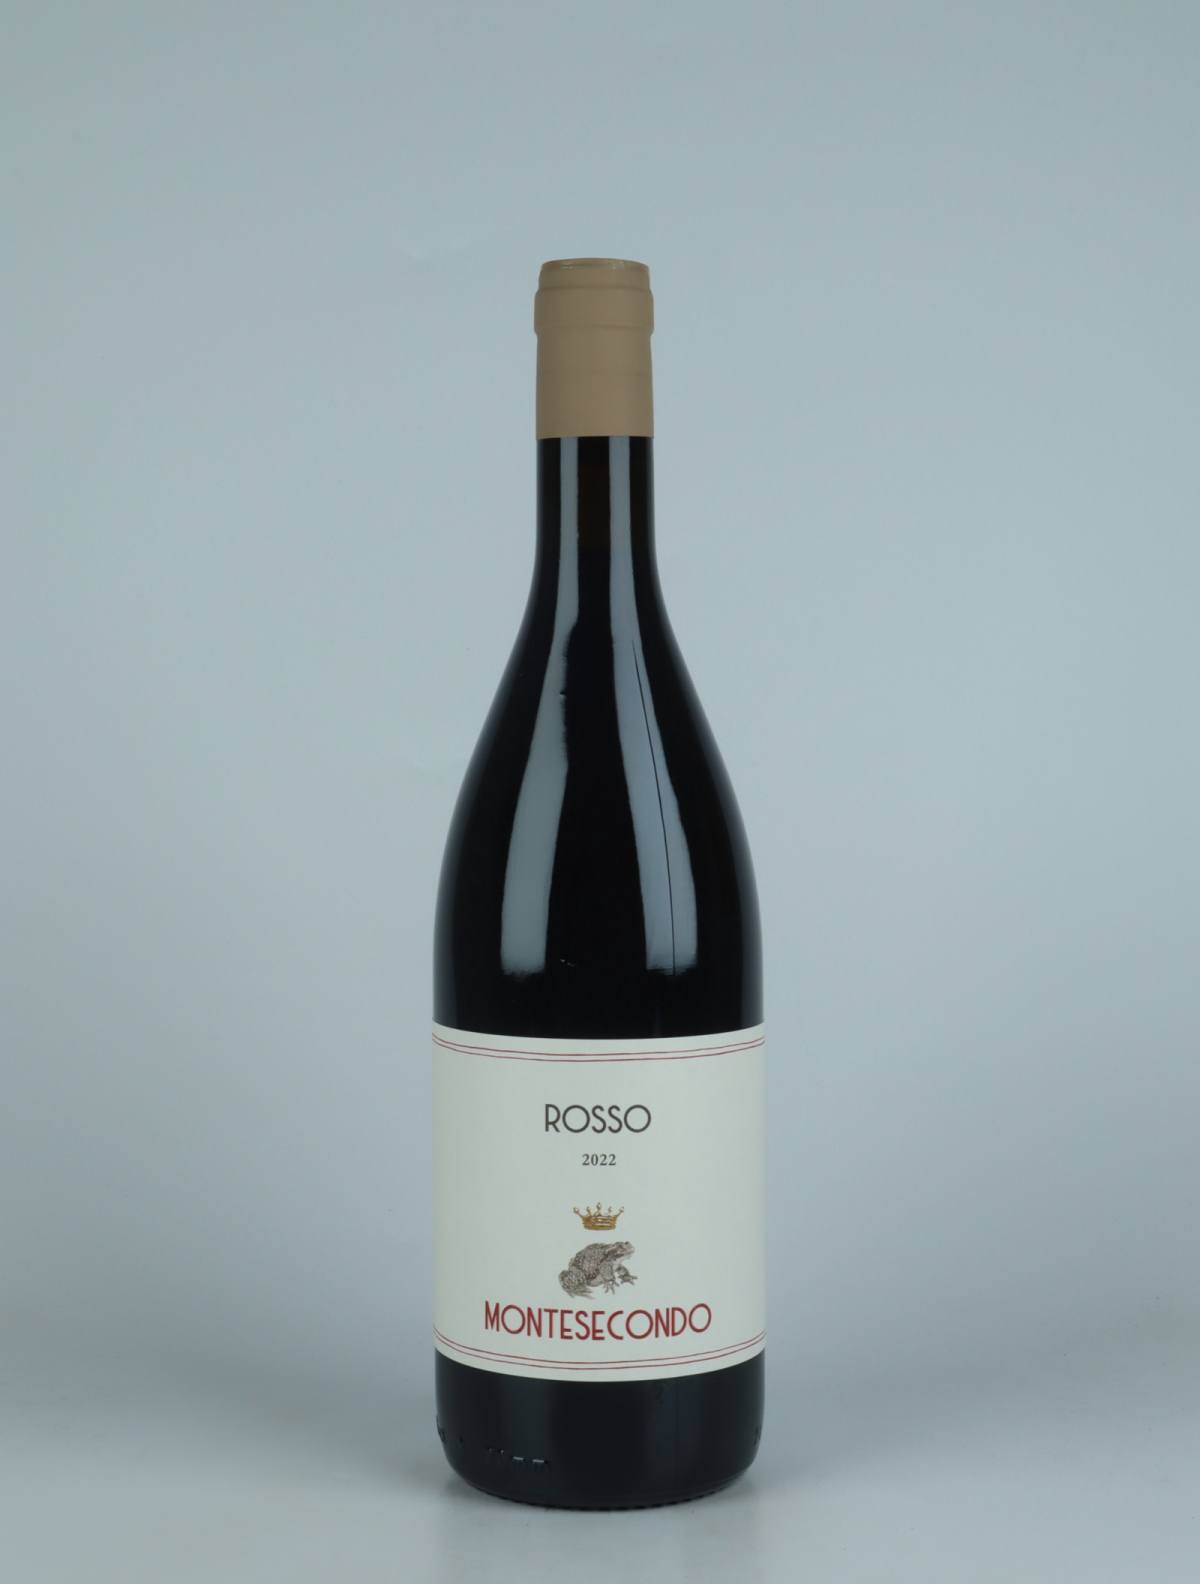 A bottle 2022 Rosso - Sangiovese Red wine from Montesecondo, Tuscany in Italy